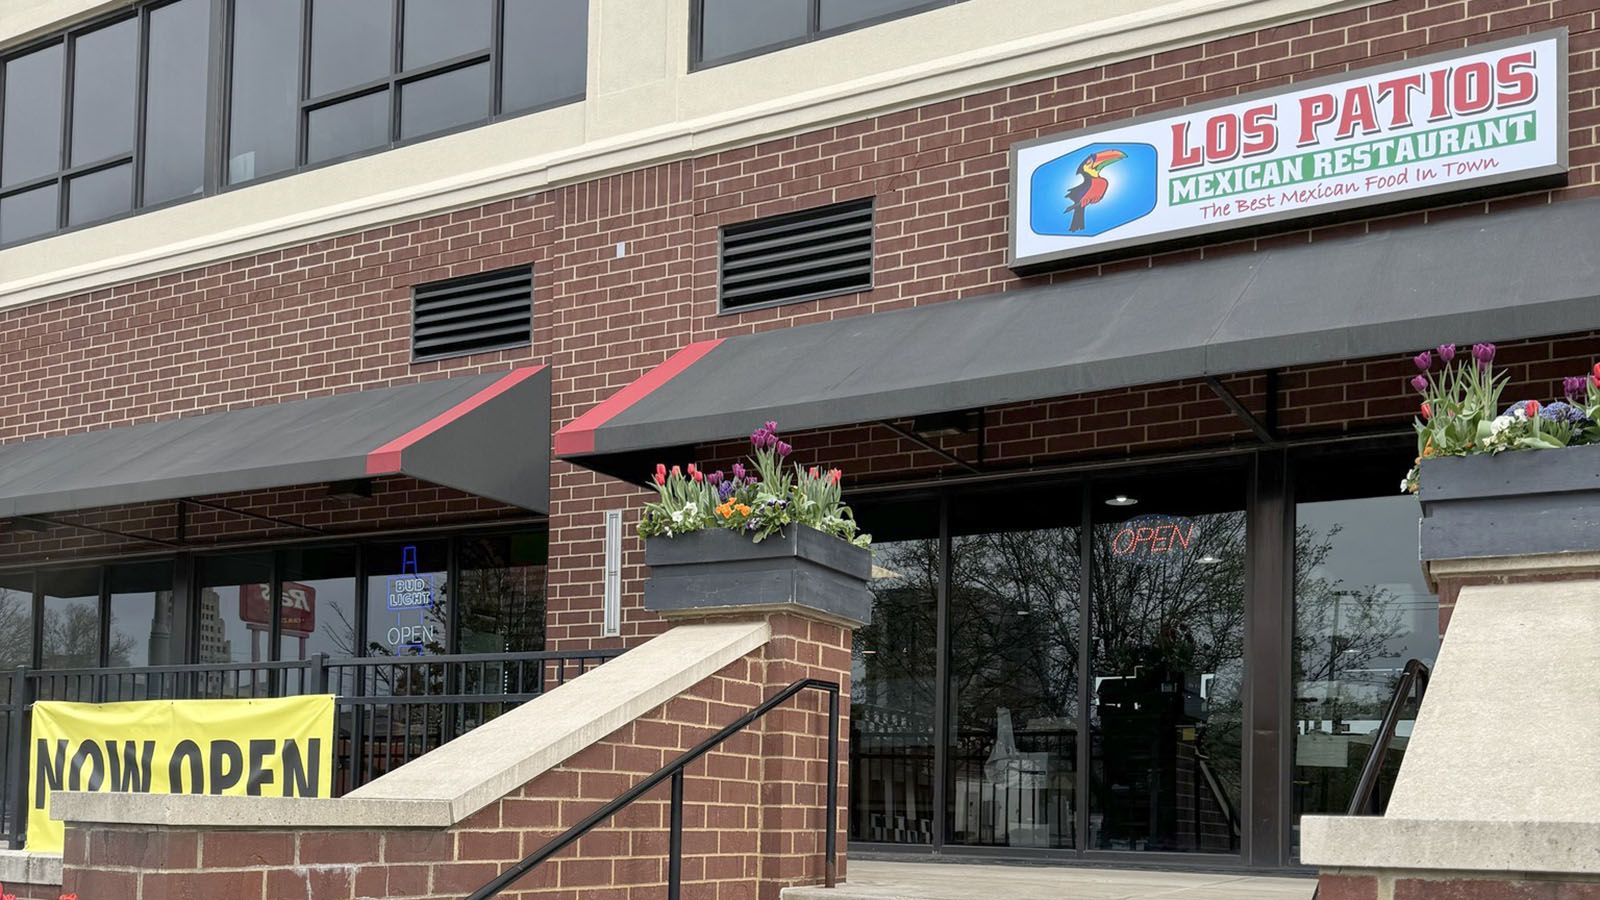 Los Patios Mexican Restaurant has opened in downtown Fort Wayne.